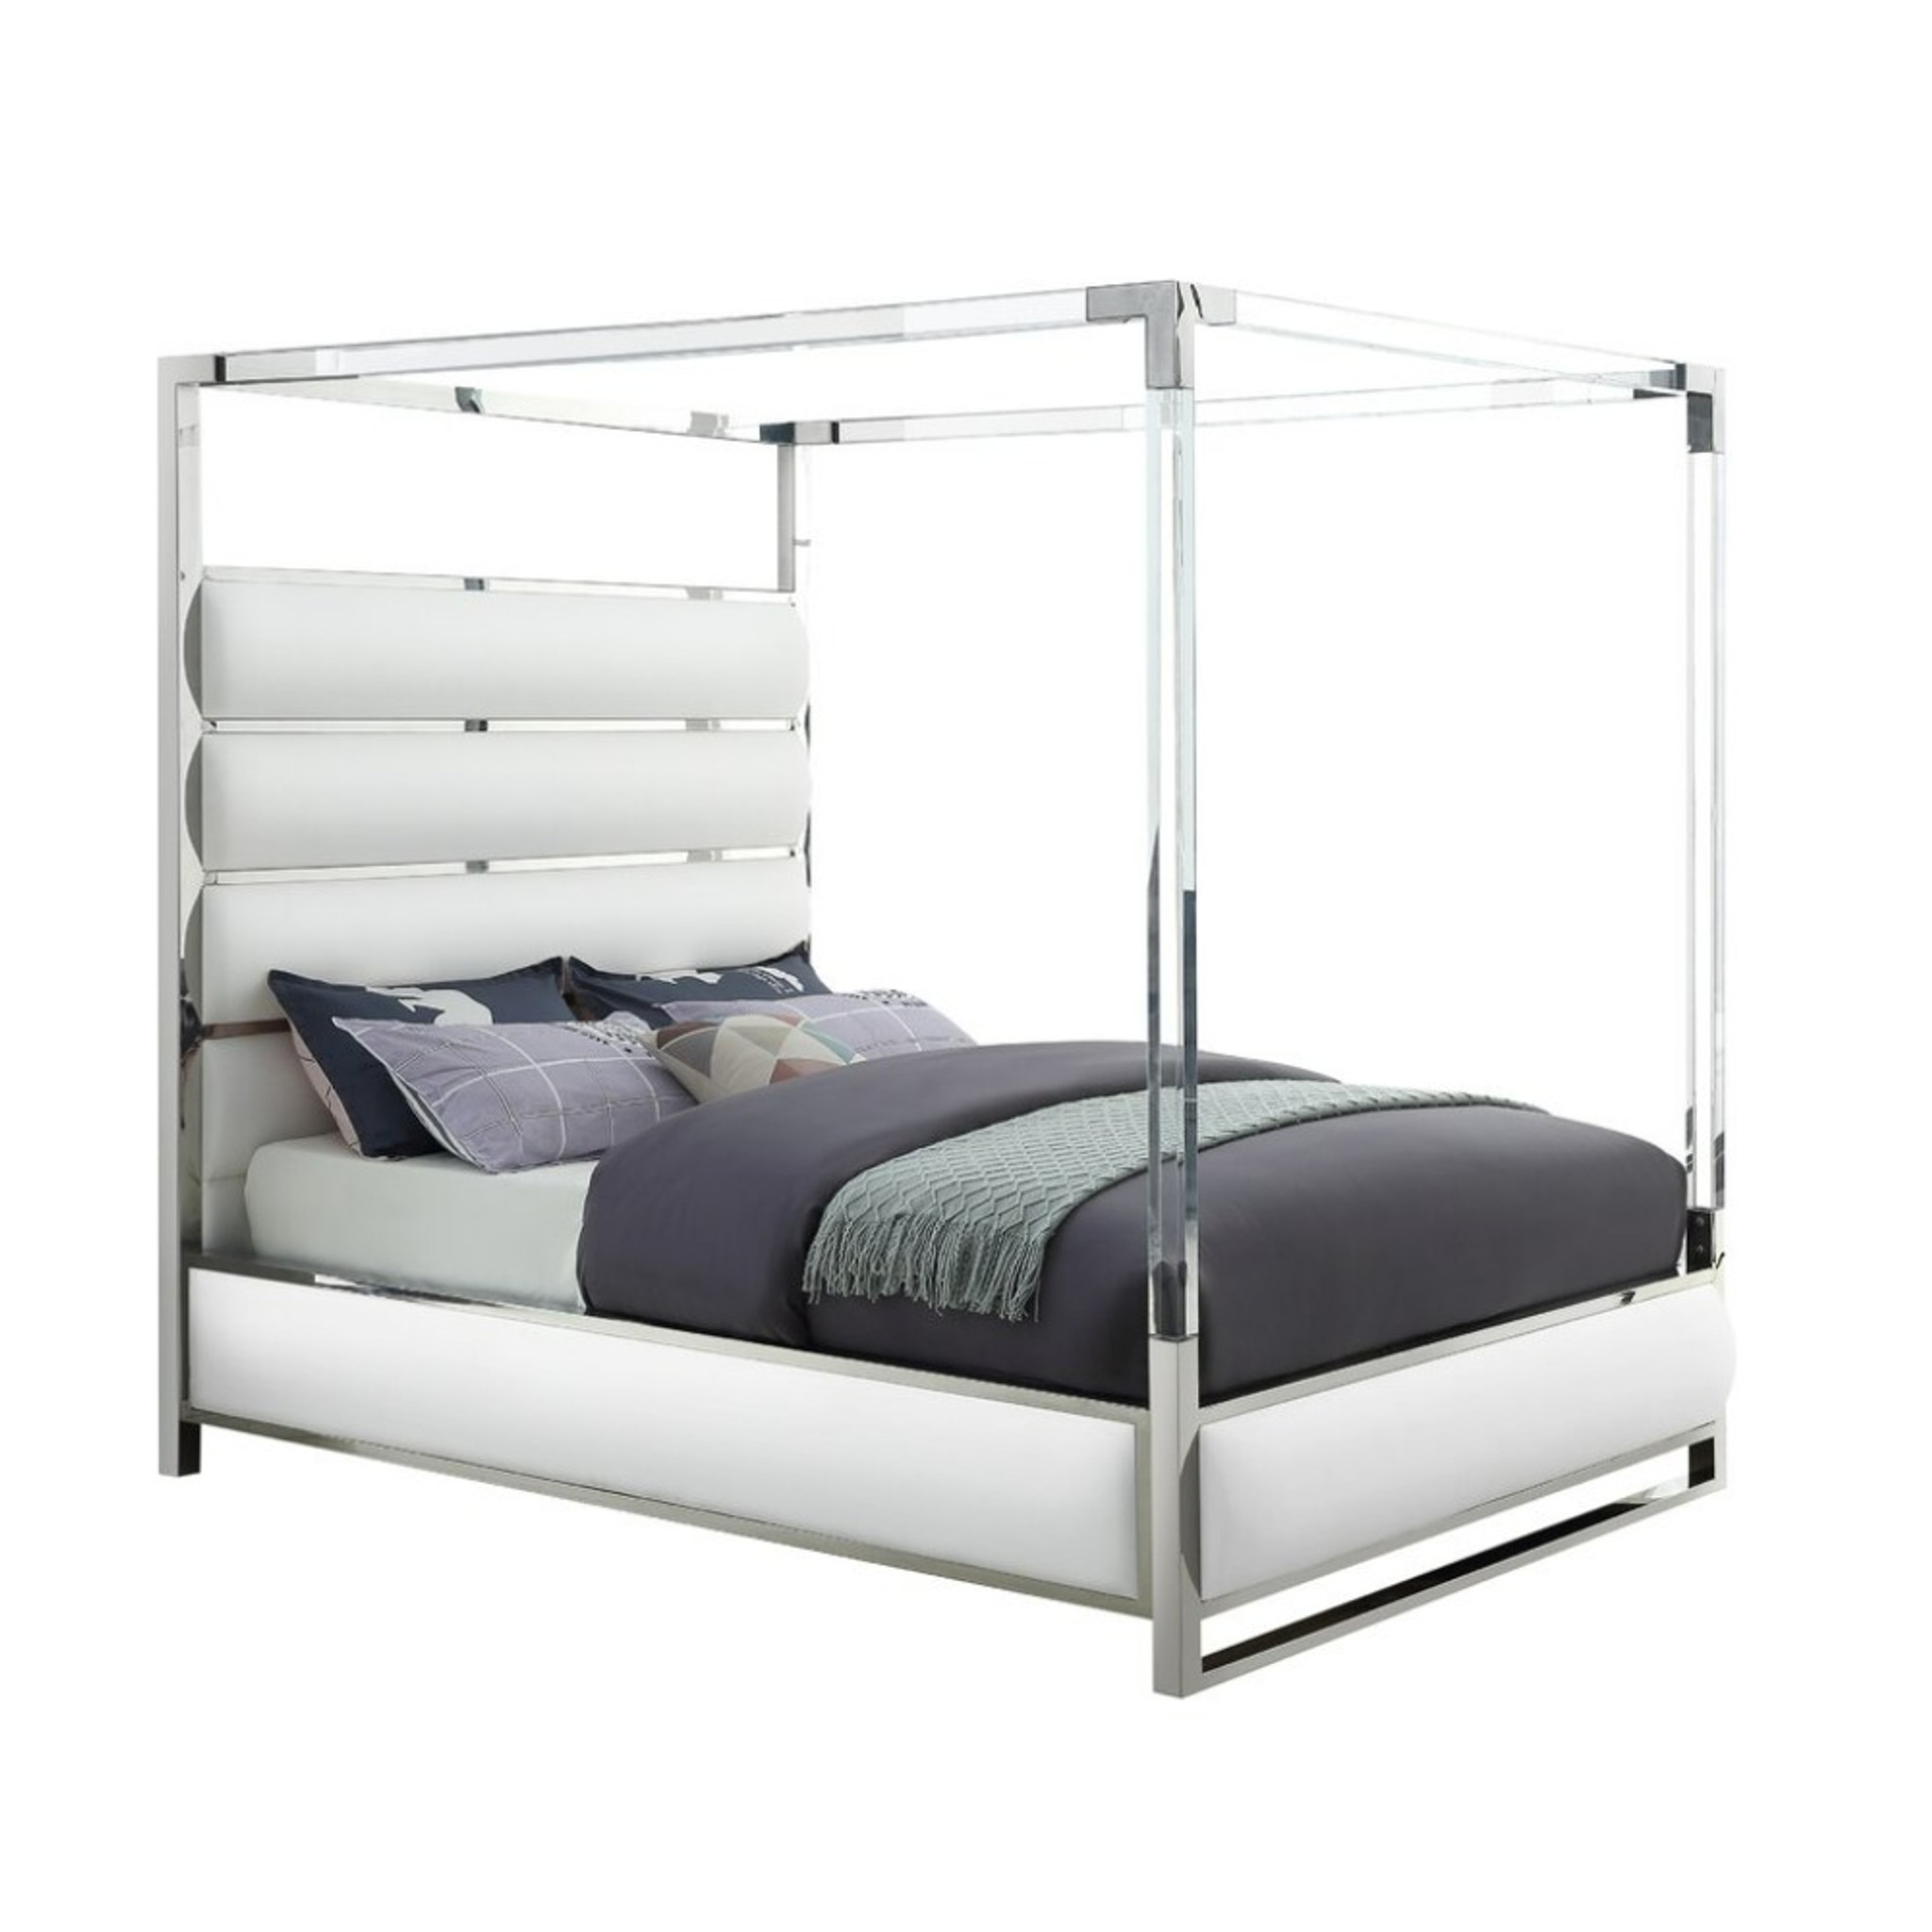 Chrome and Lucite Canopy Bed with White Chanel Tufting